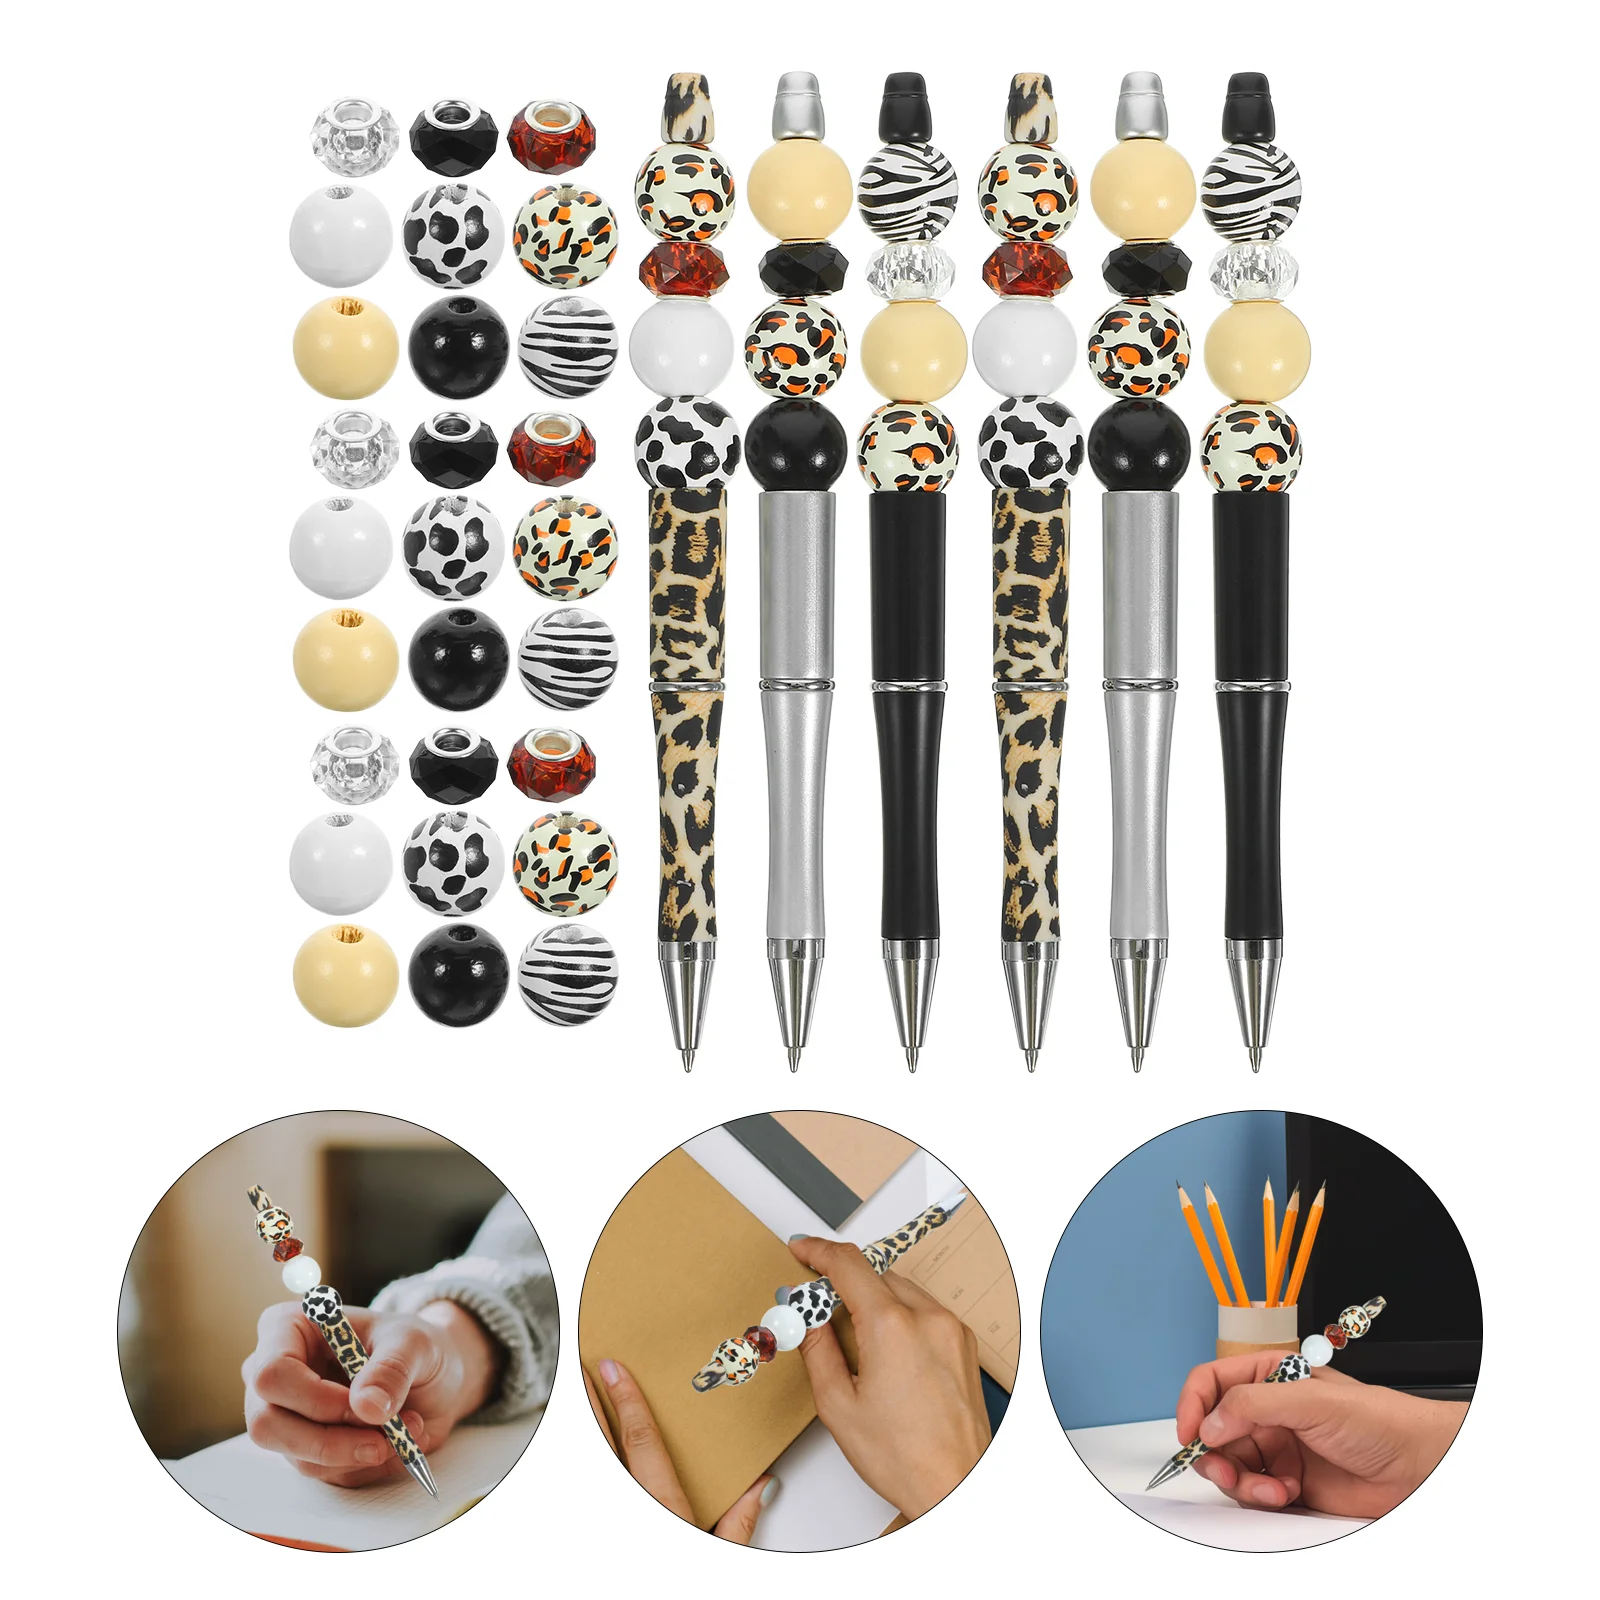 12 Pcs Plastic Pens Beaded Craft Plastic Beadable Kit Bulk Adult Accessory with Beads Silicone Portable bulk sale side awnings collapsible coating portable outdoor camping tent